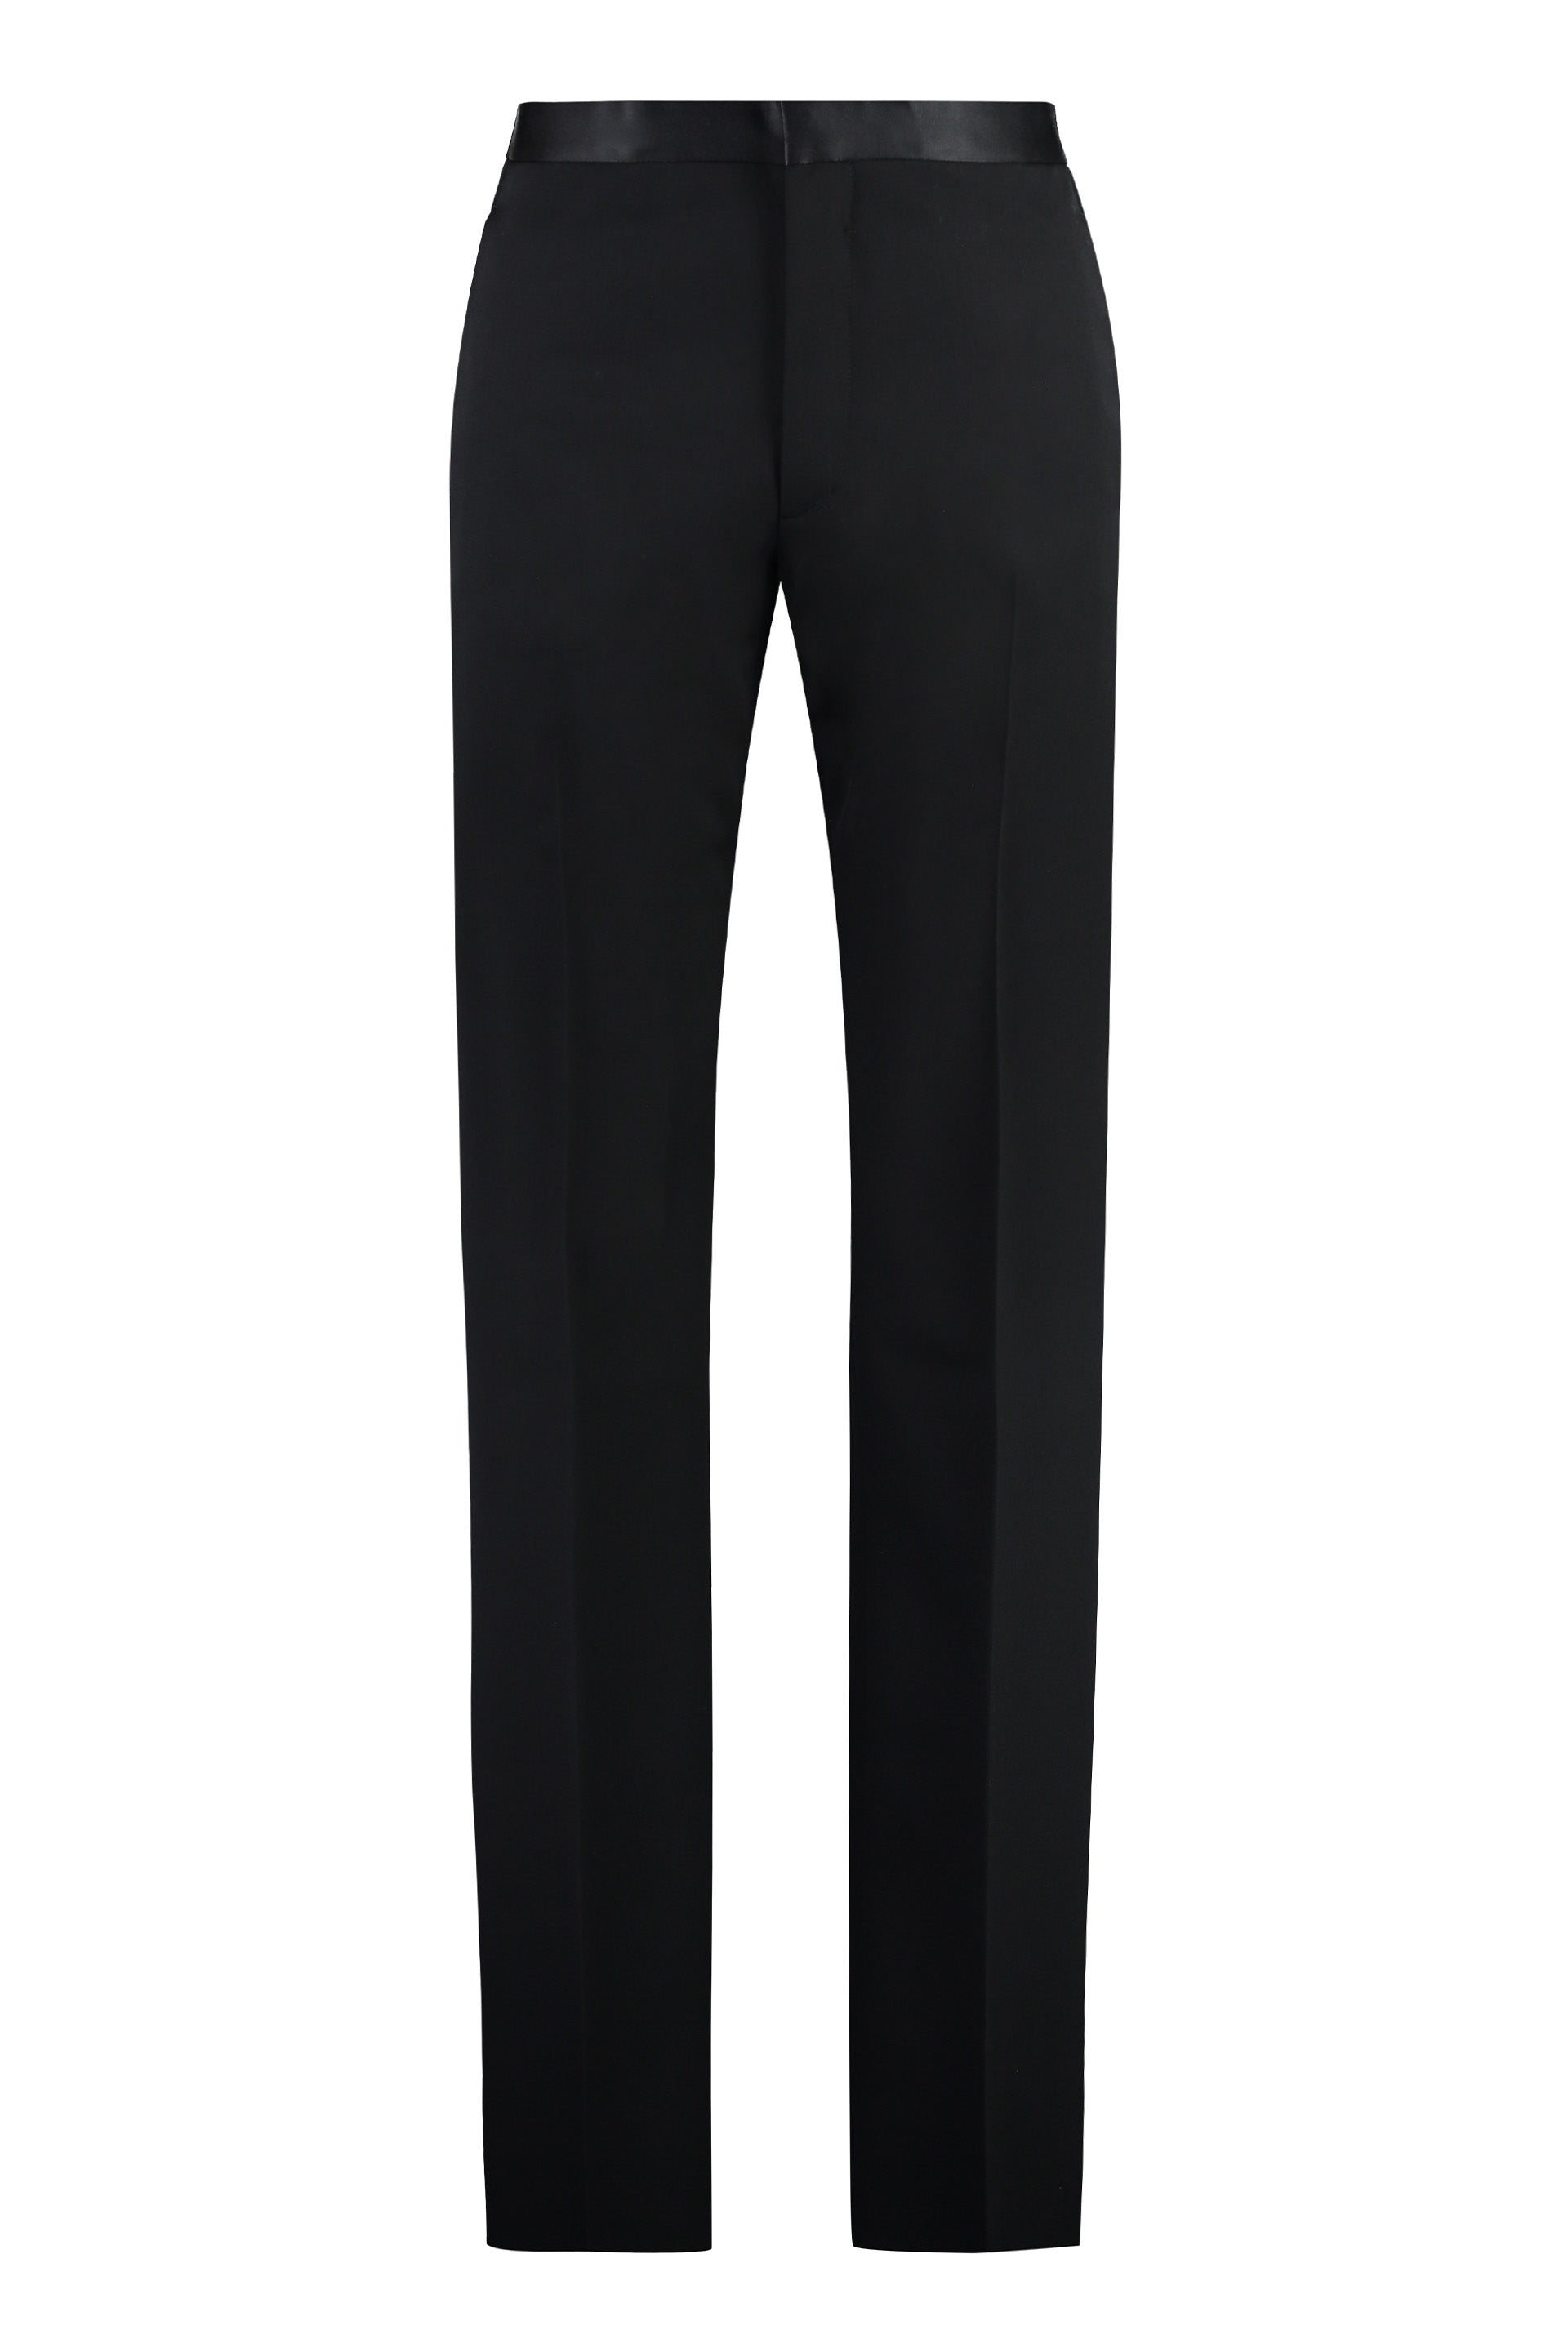 Givenchy Tailored Black Wool Trousers For Men